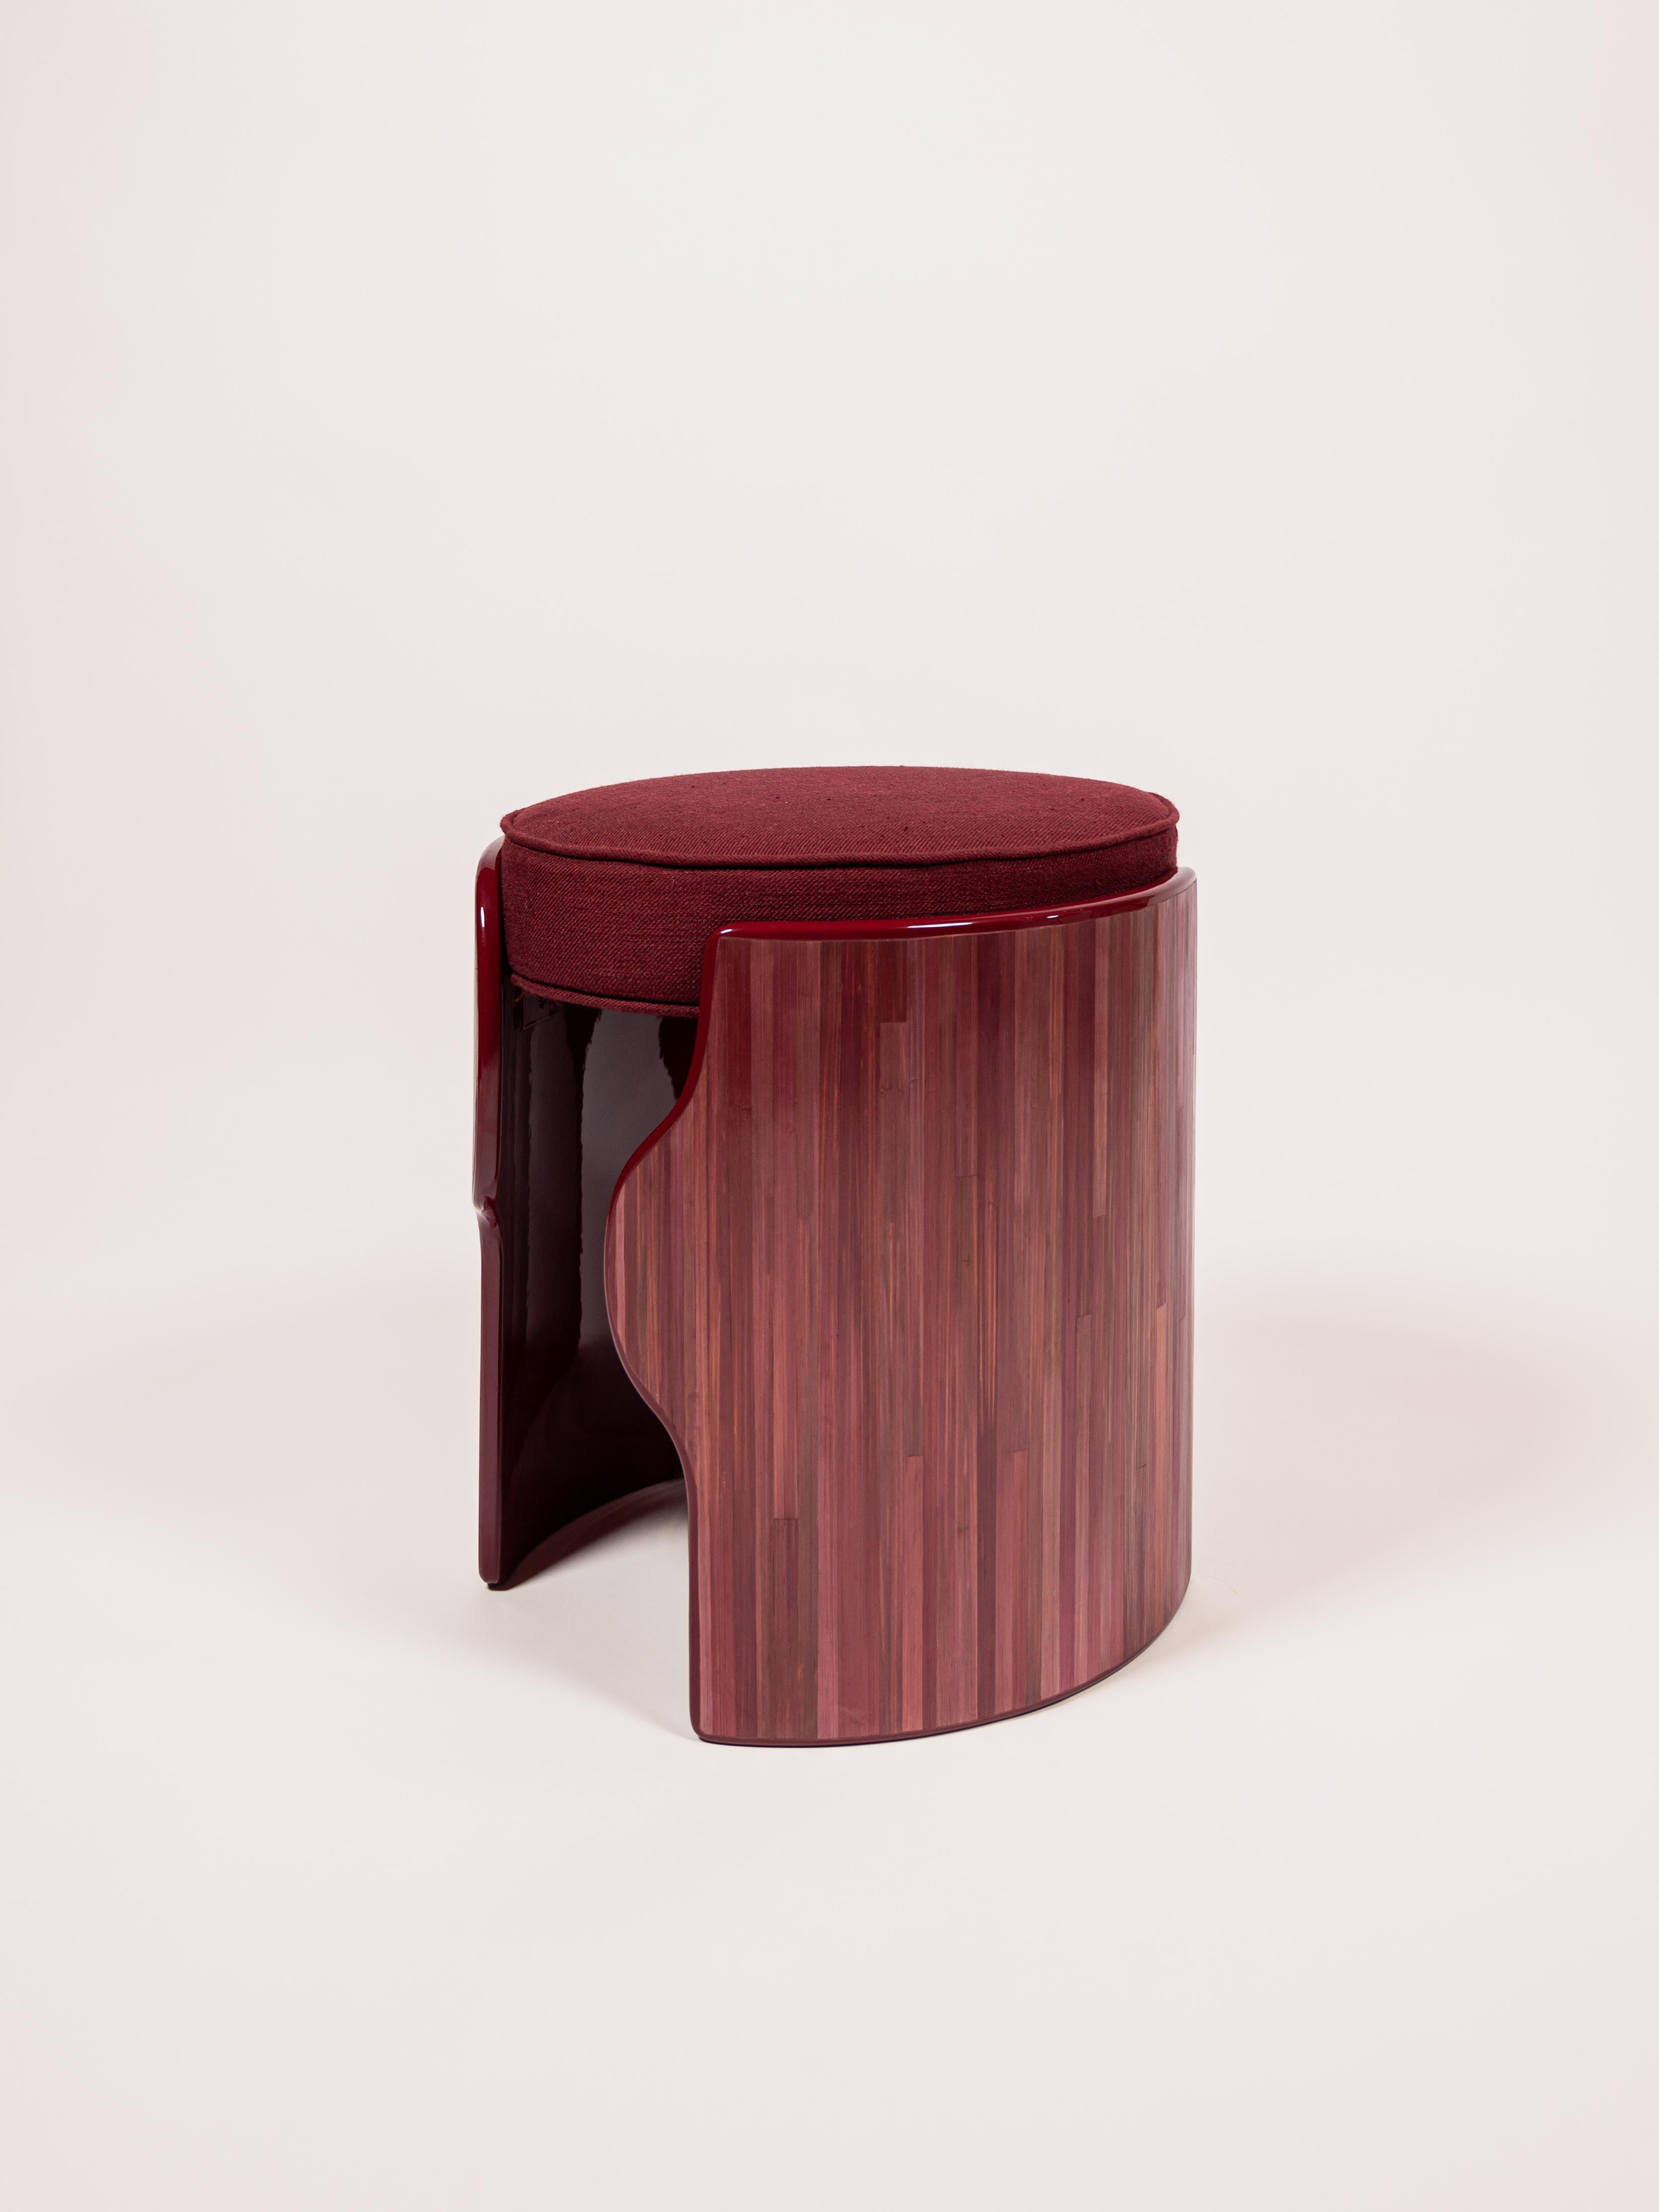 A graduate of the schools of applied art Duperré and Olivier de Serres, Léa Zeroil began her career with India Mahdavi before joining Laura Gonzalez as designer and artistic director of the furniture collections. In 2020, she founded her studio and